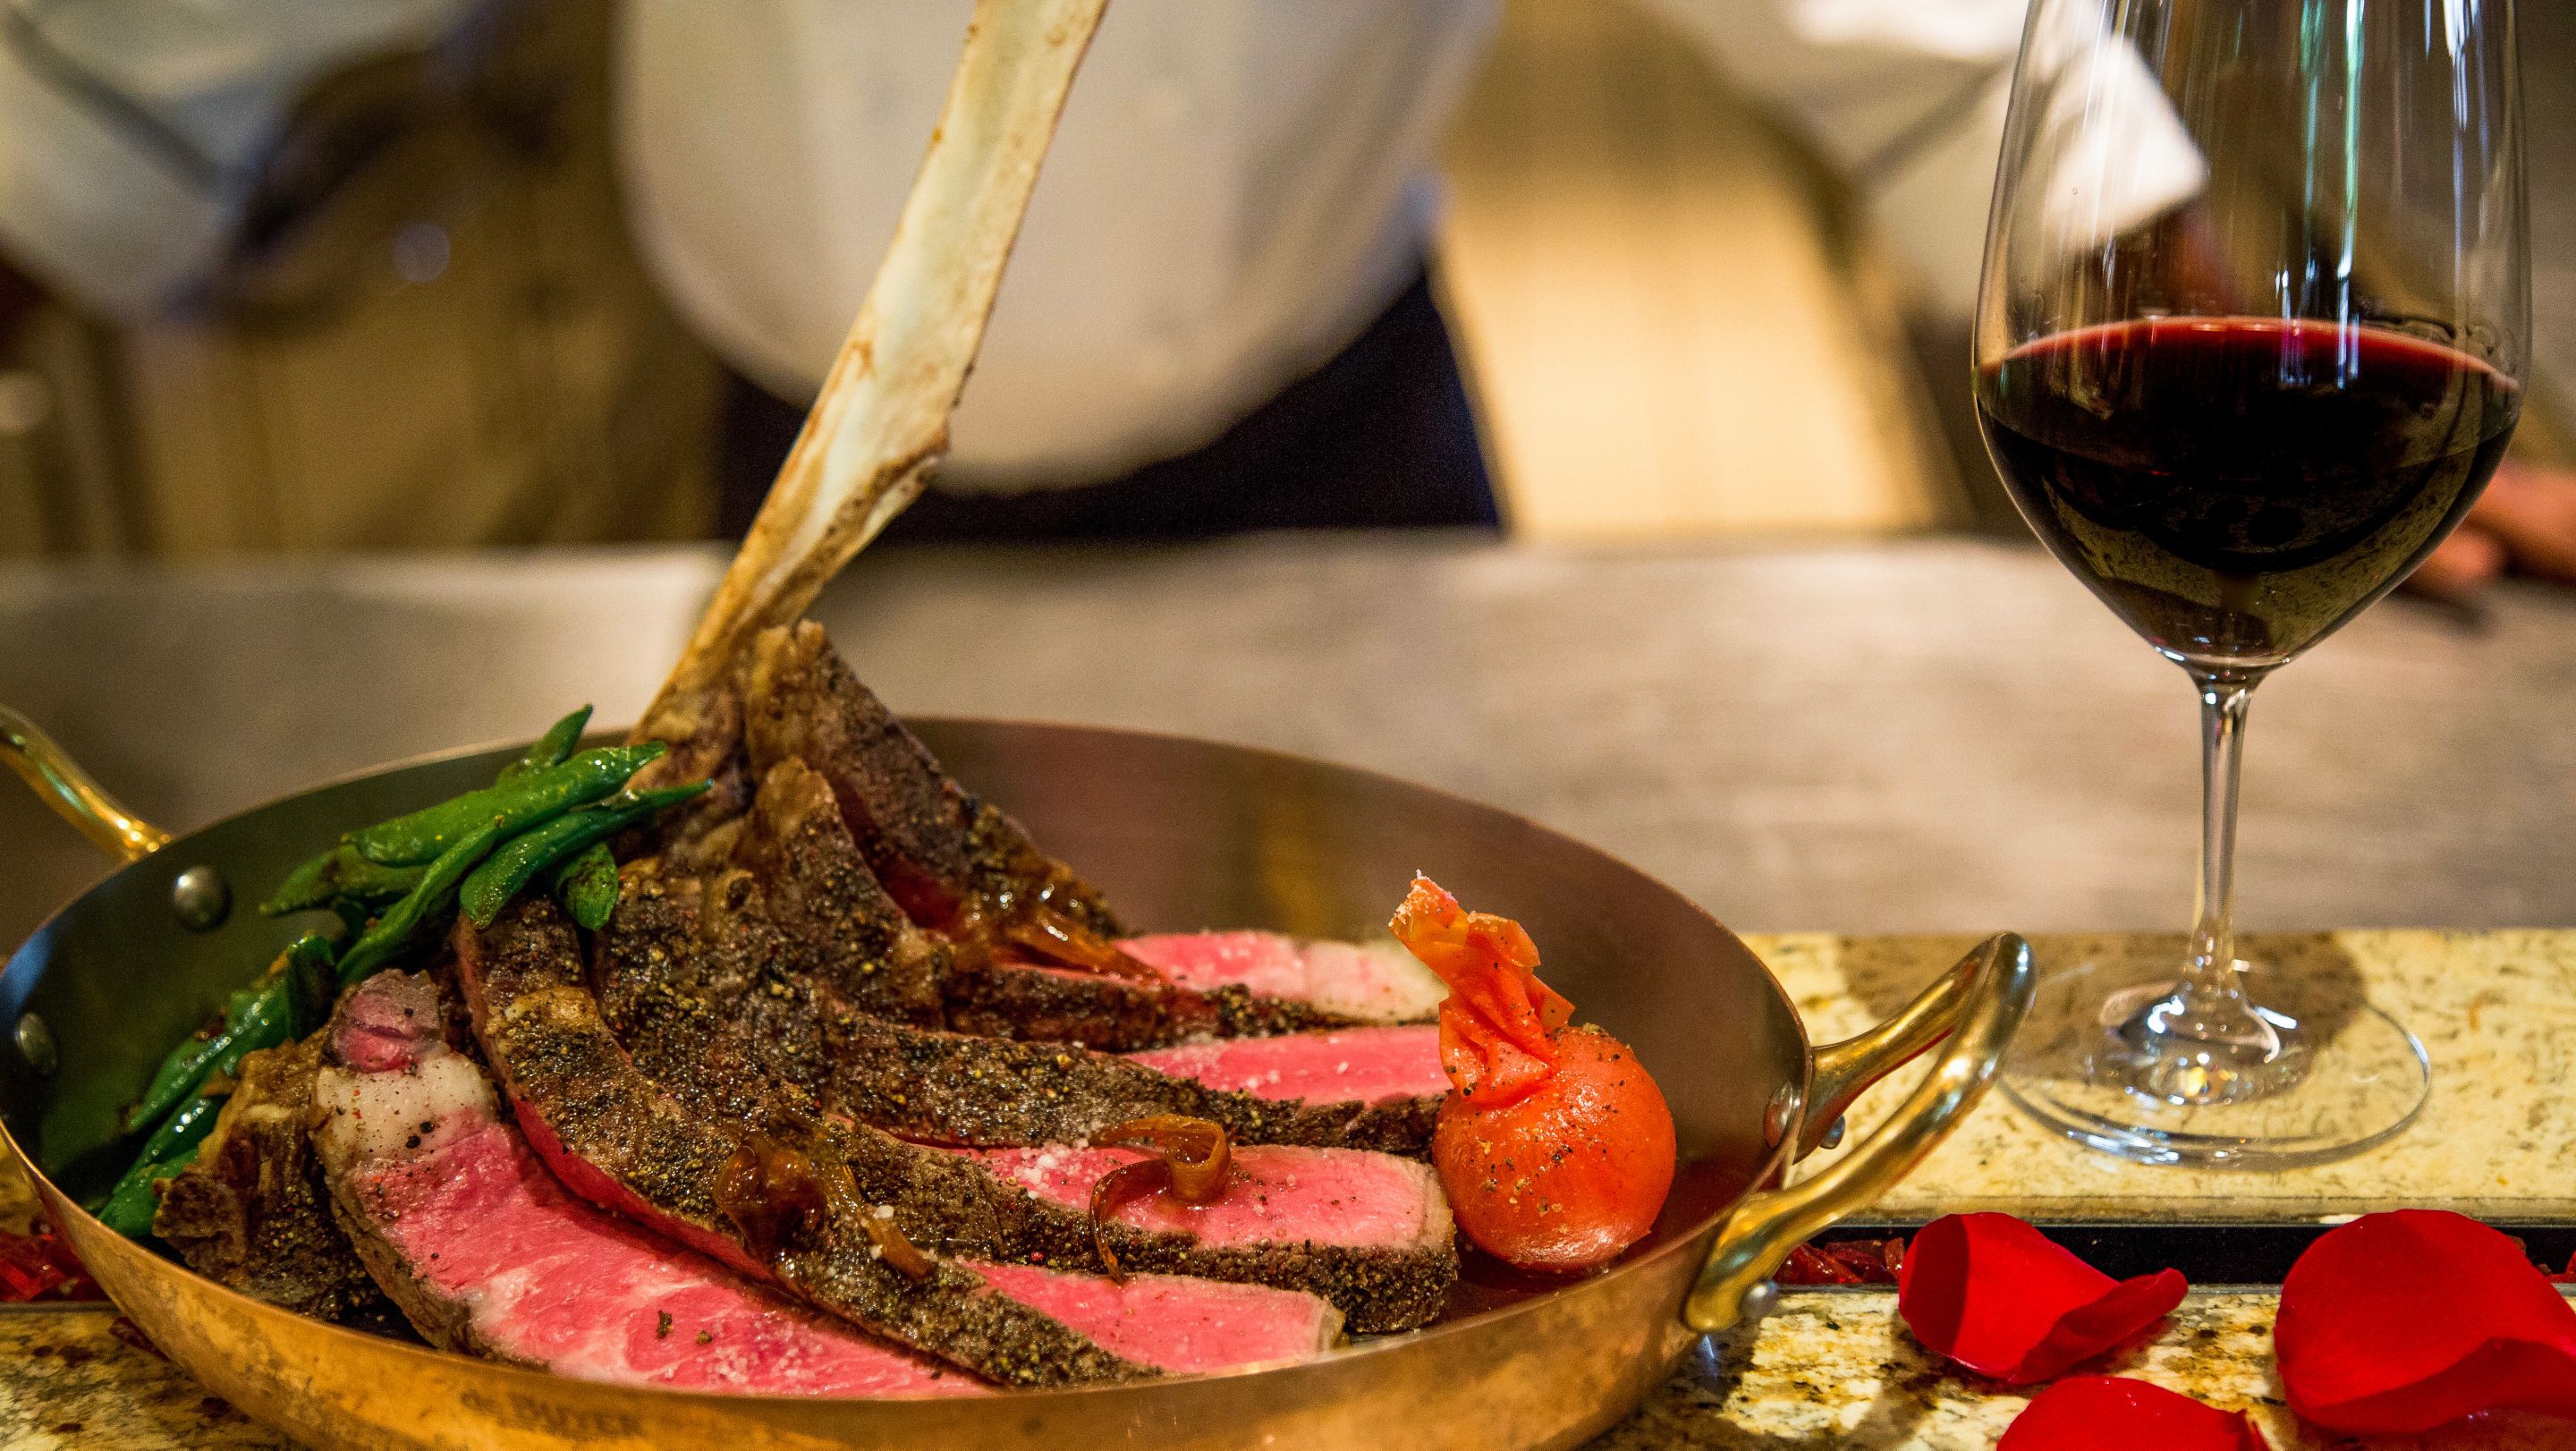 A chef stands over a presentation of a steak and glass of wine